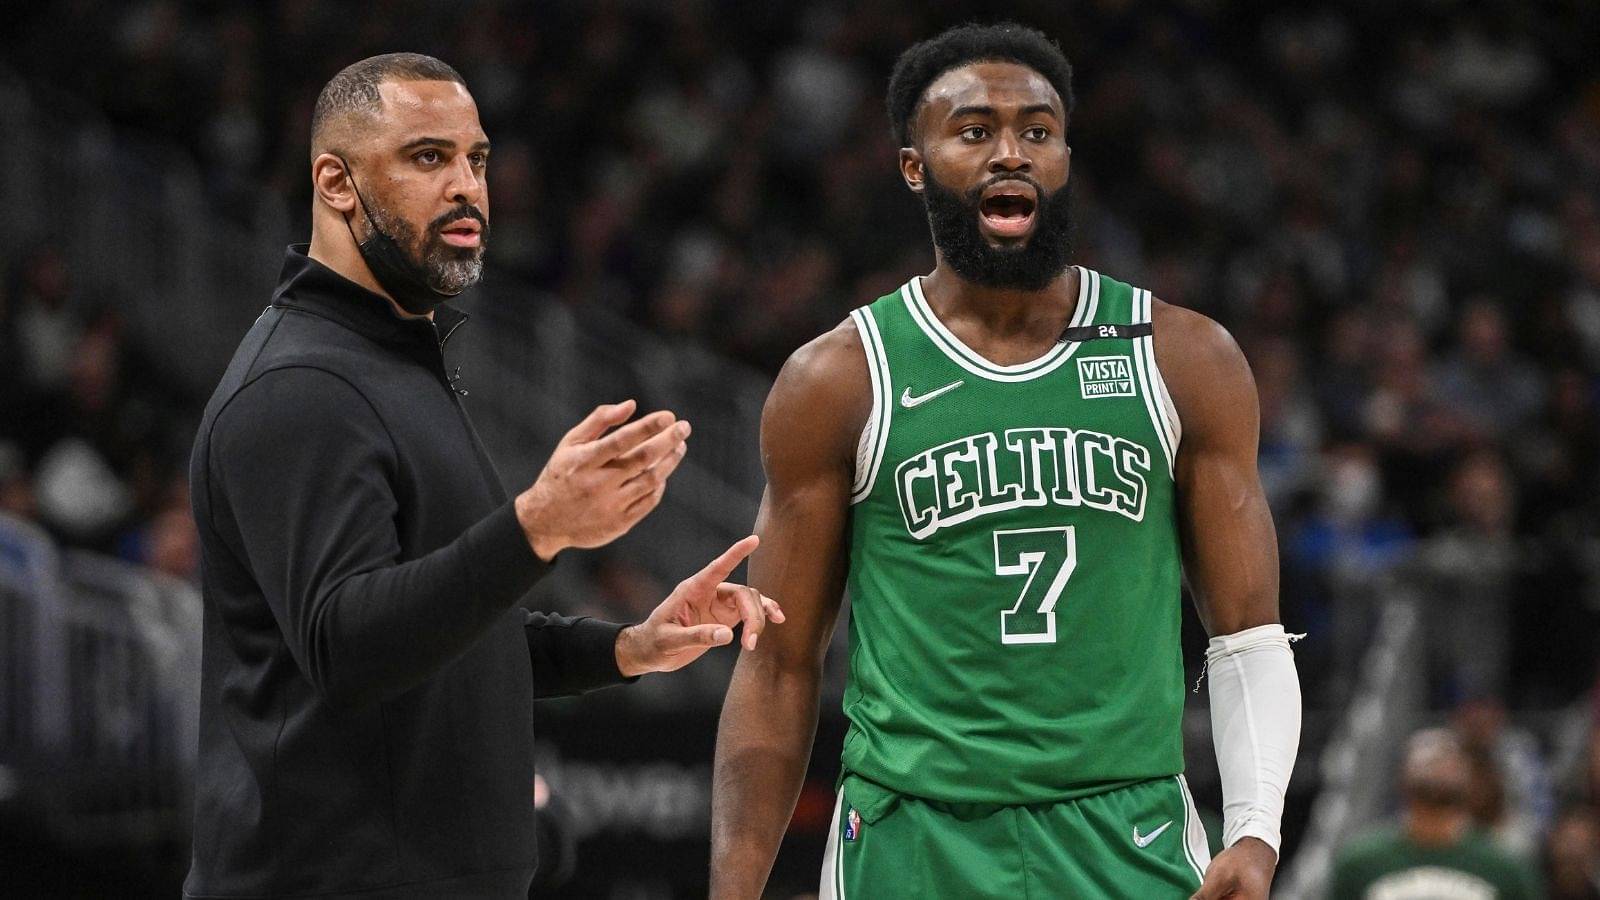 “The energy is about to shift”: When Jaylen Brown accurately predicted the turnaround in fortunes for the Boston Celtics this season